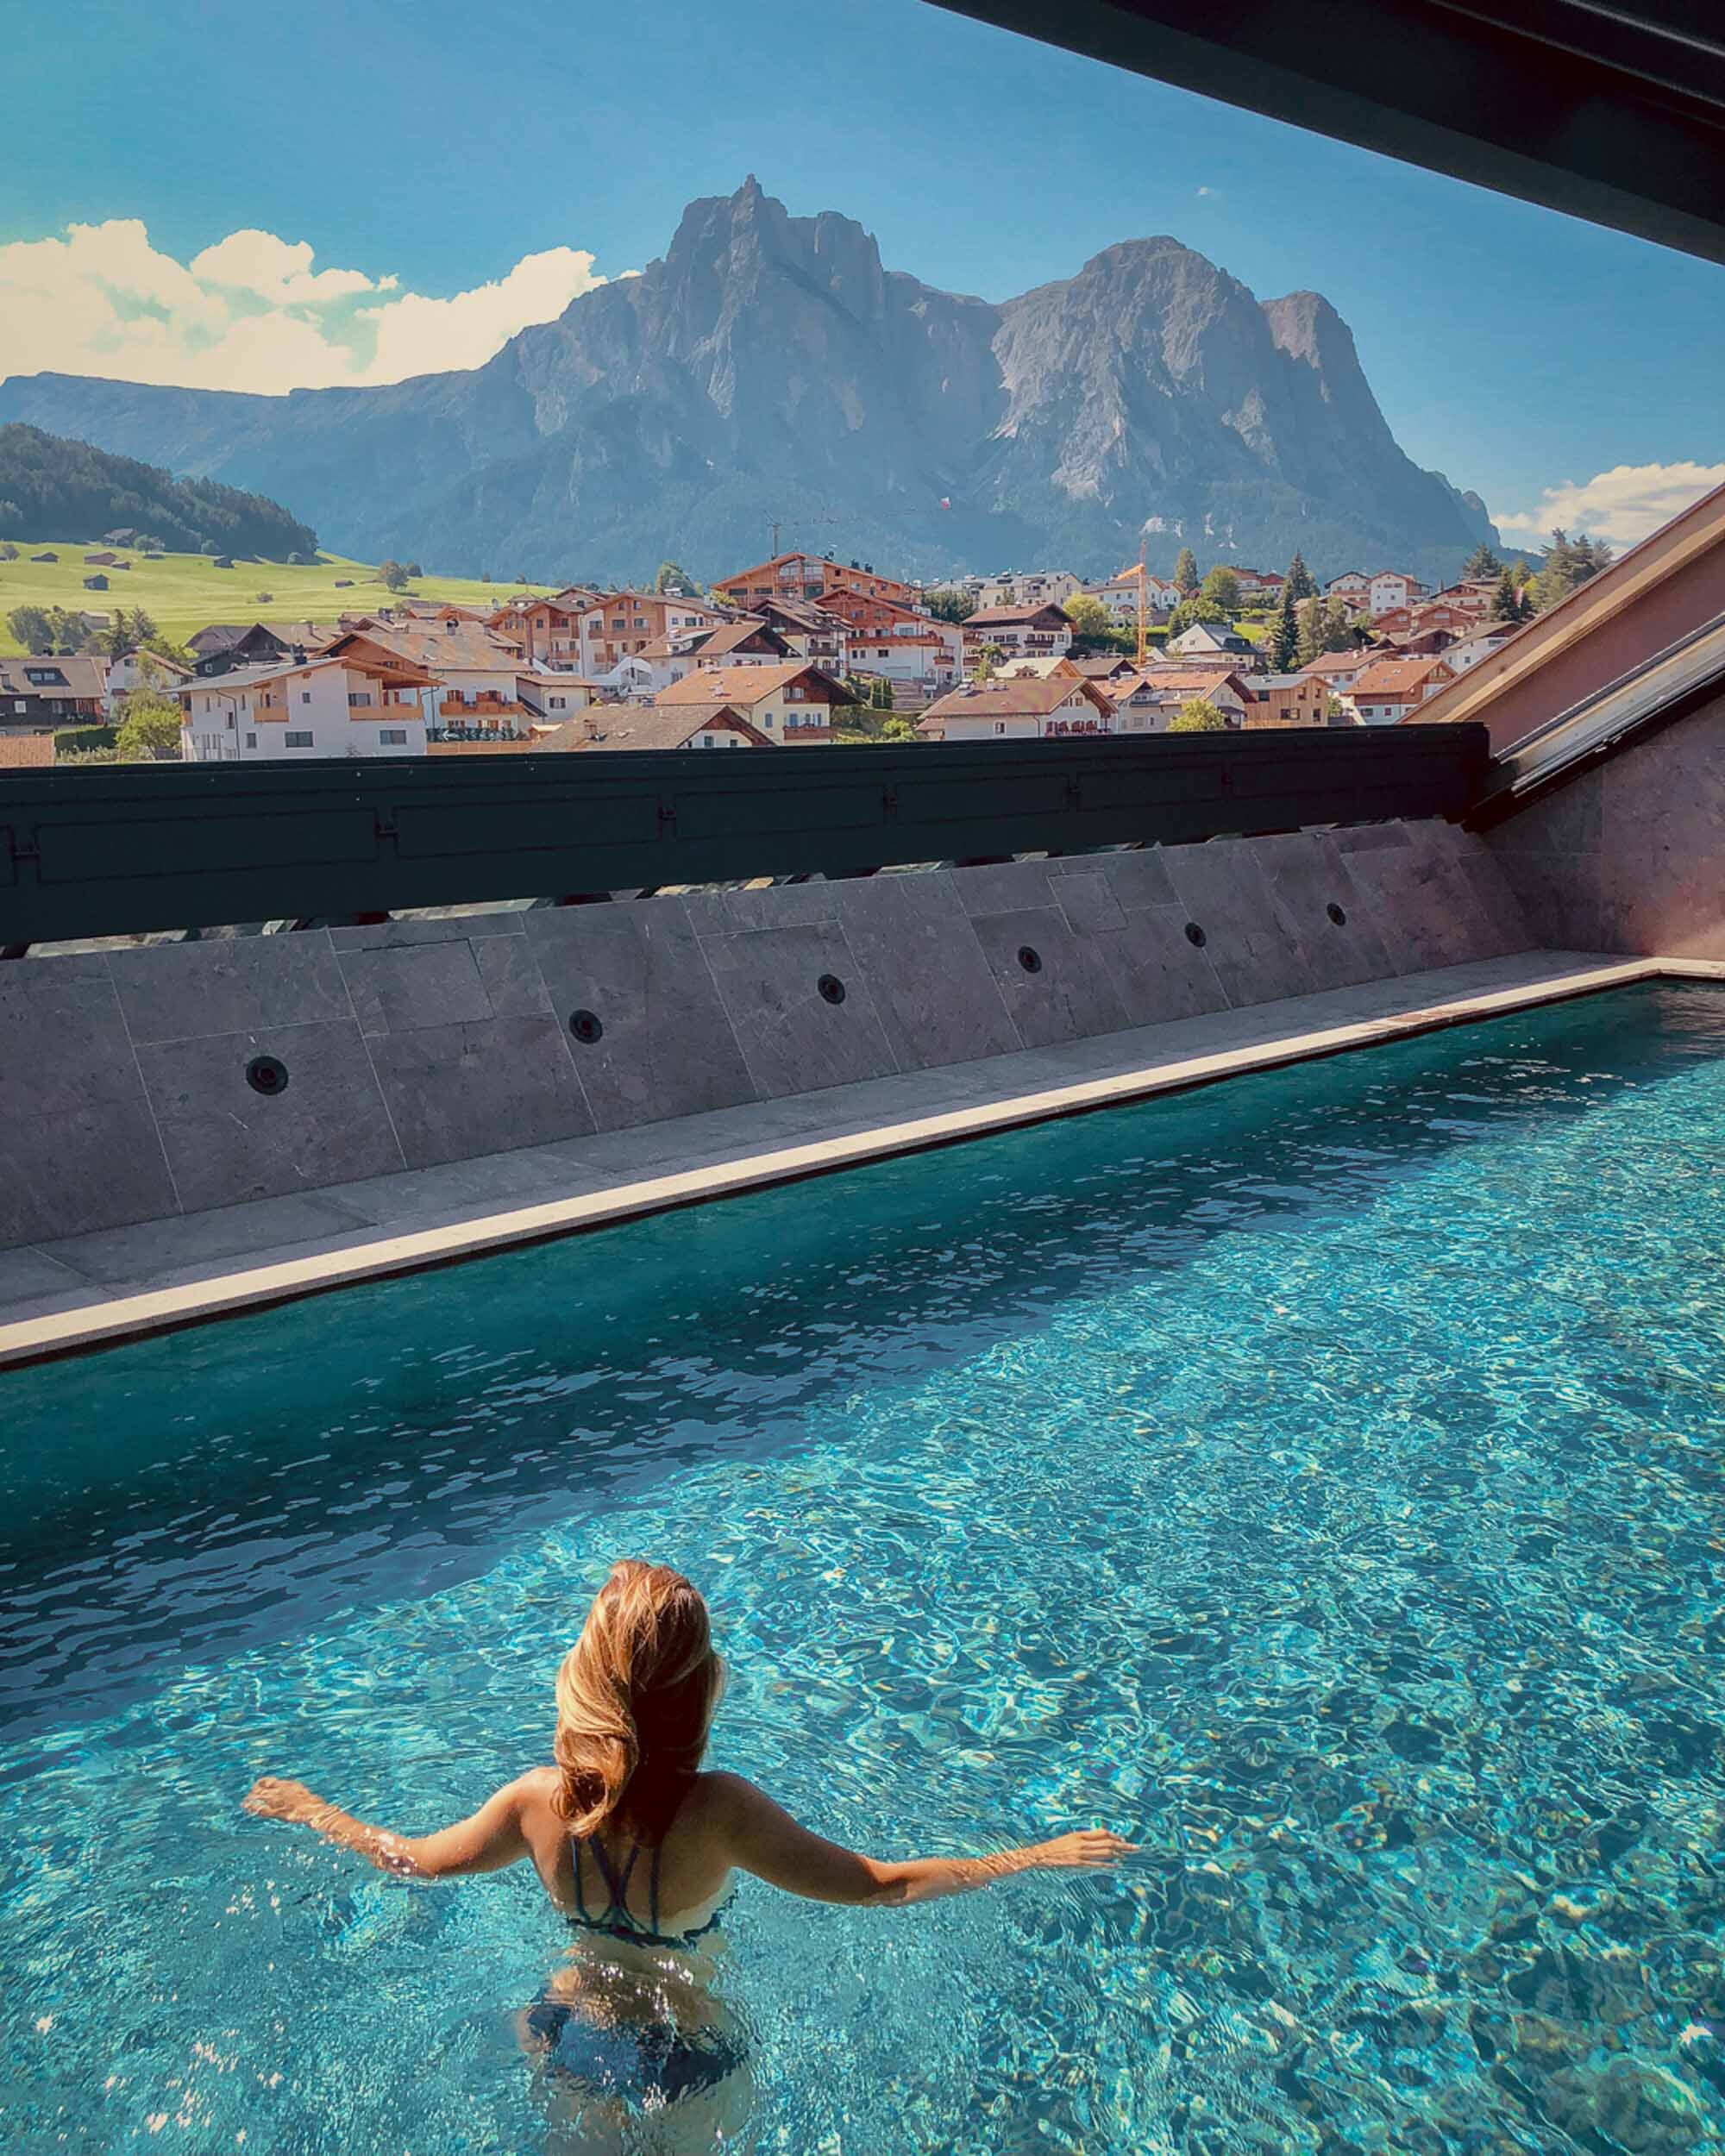 The rooftop pool at Hotel Lamm, overlooking the Dolomites.